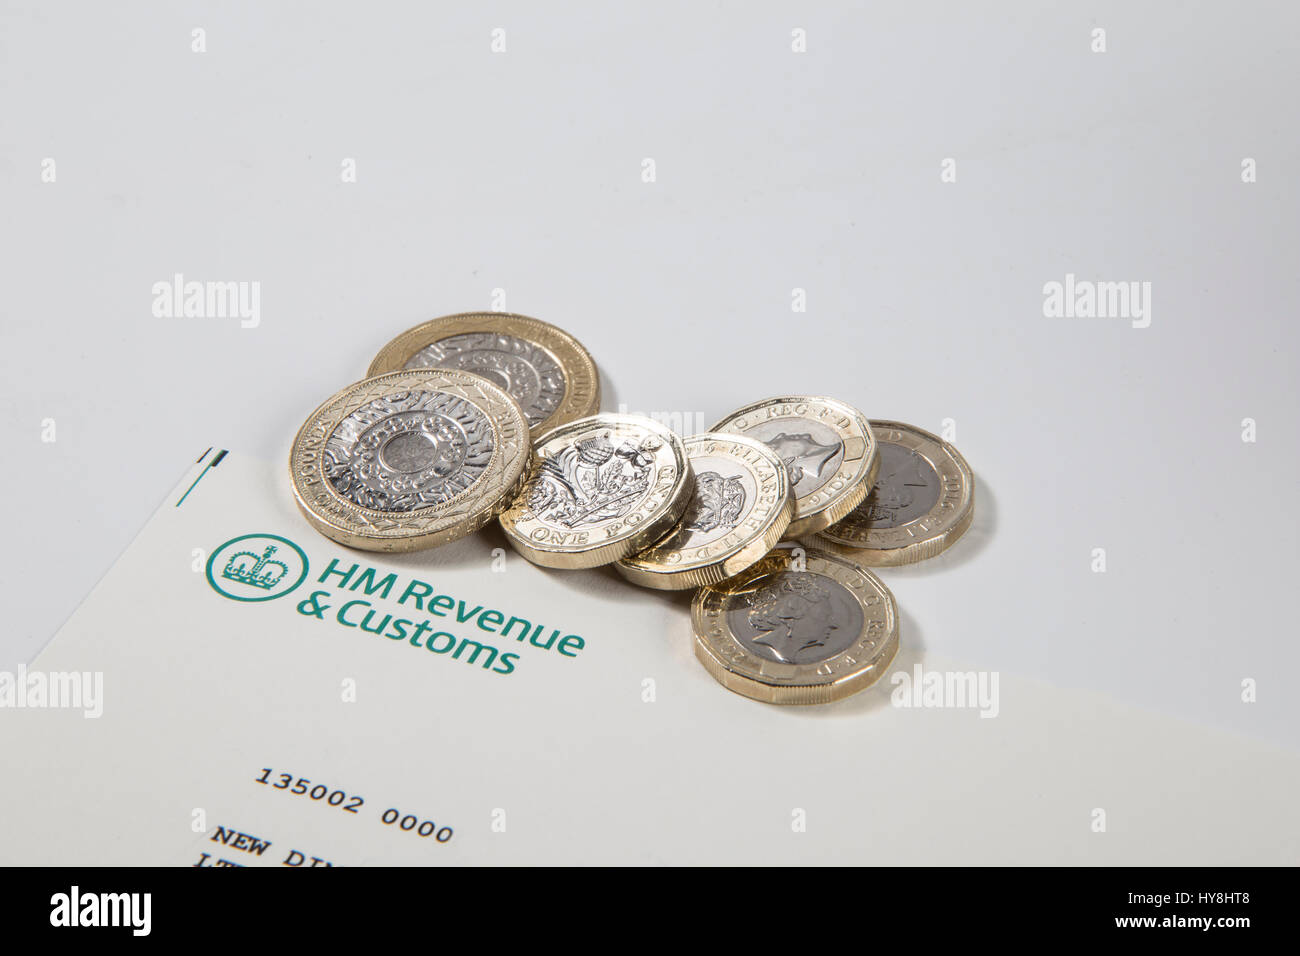 New £1 pound coins, £2 pound coins and £5 pound notes on an HM Revenues & Customs document Stock Photo